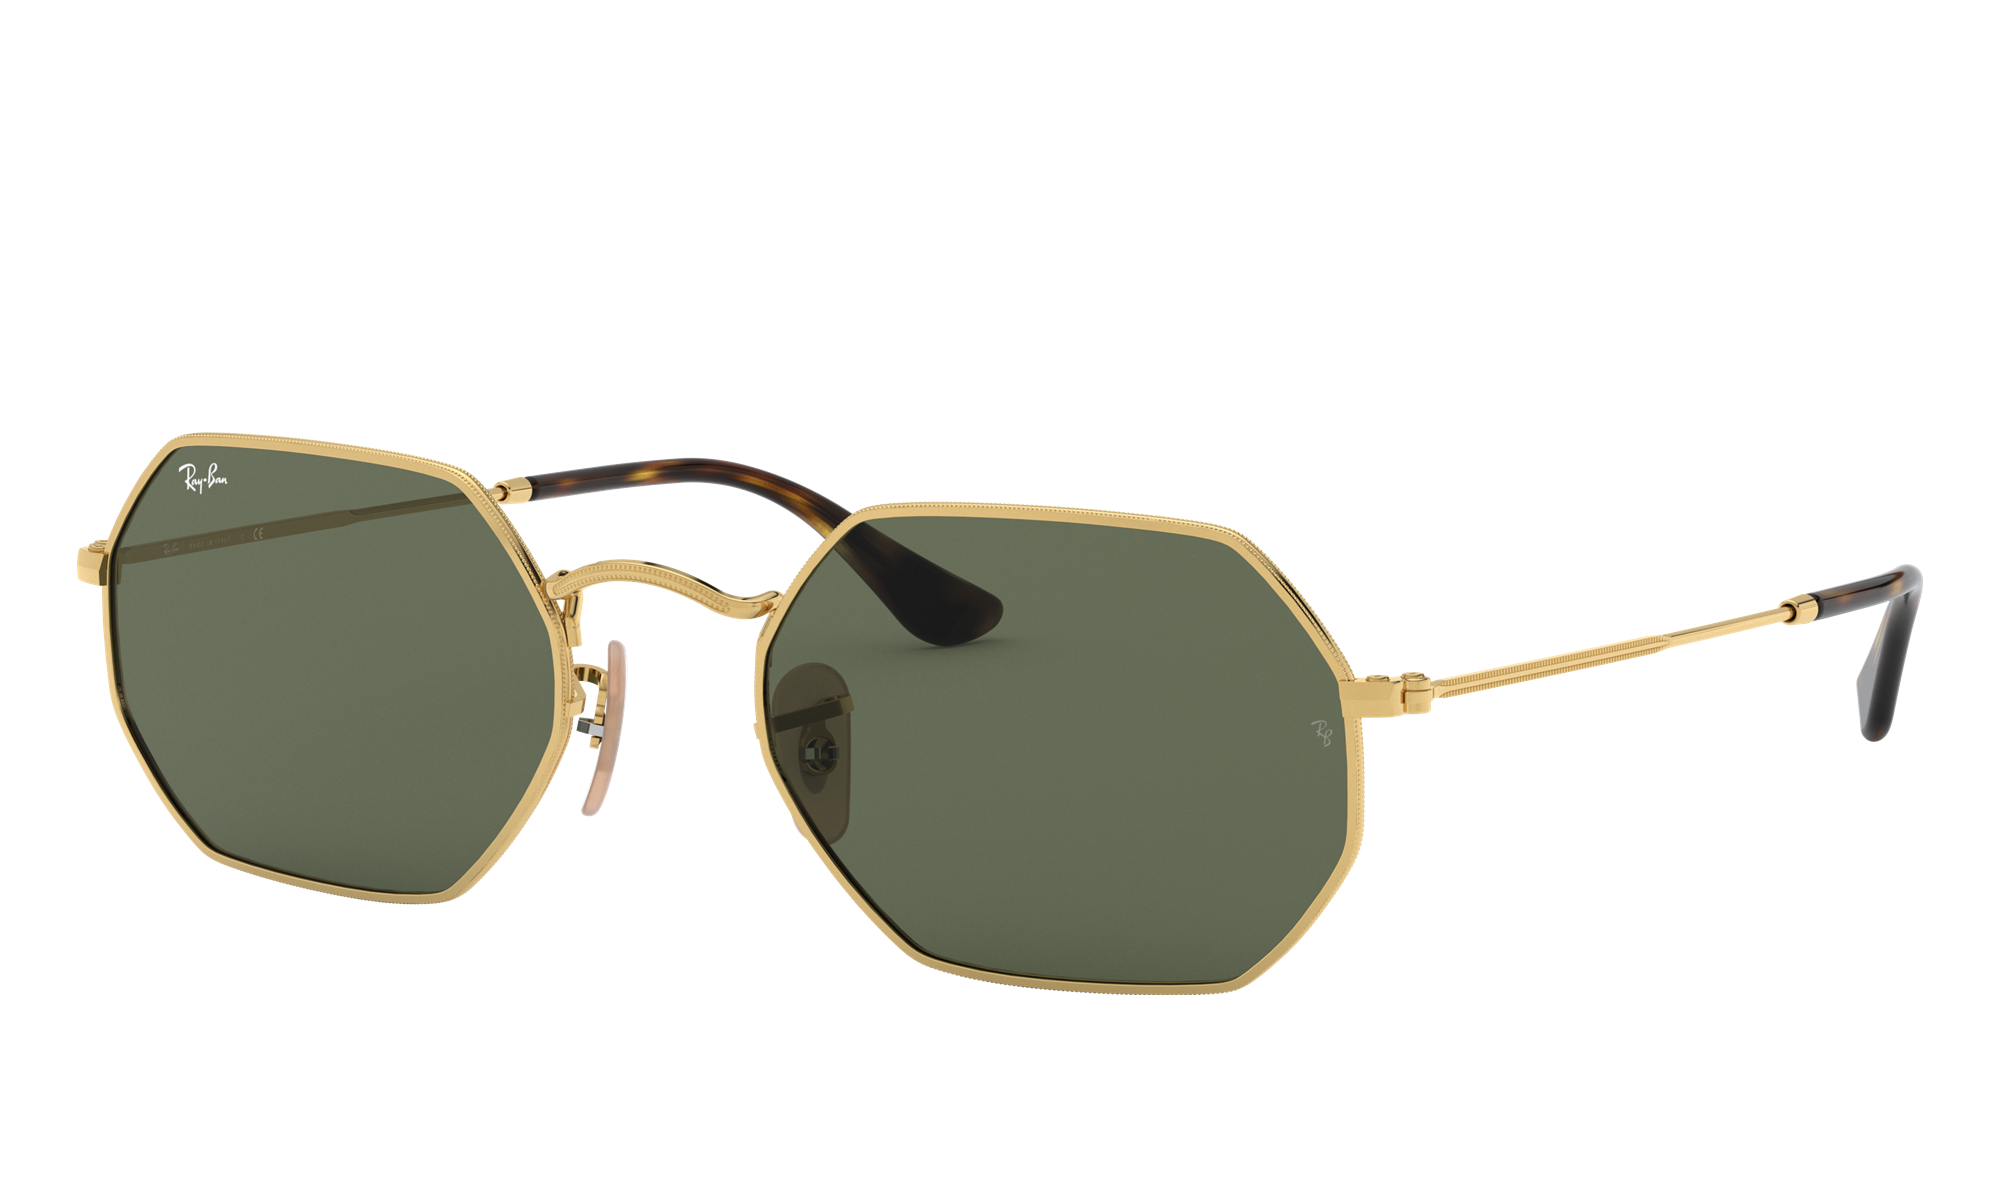 Ray-Ban Unisex Rb3556n Gold Size: Large